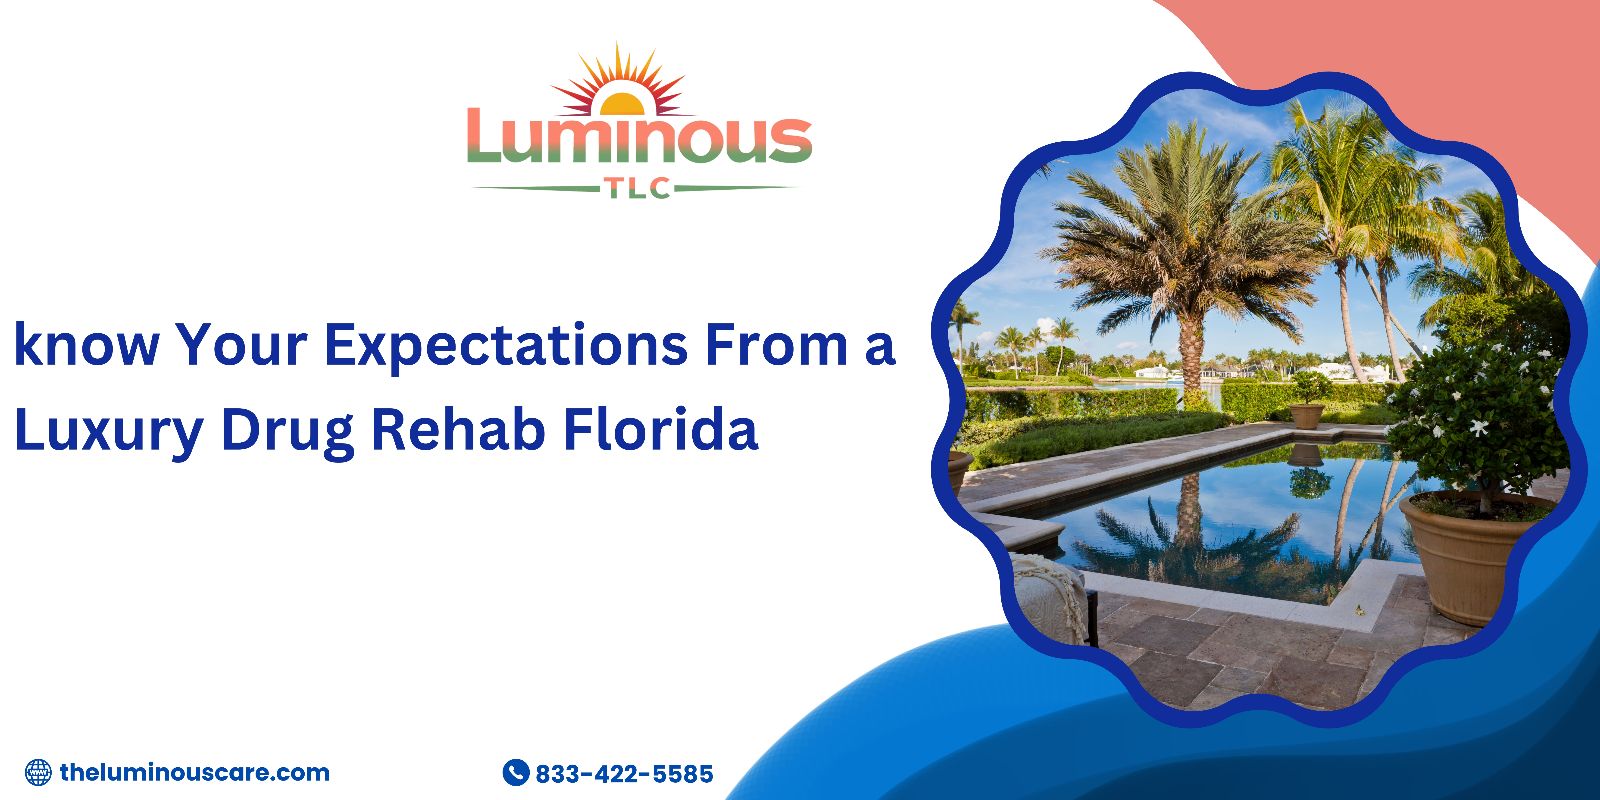 Know Your Expectations from a Luxury Drug Rehab Florida